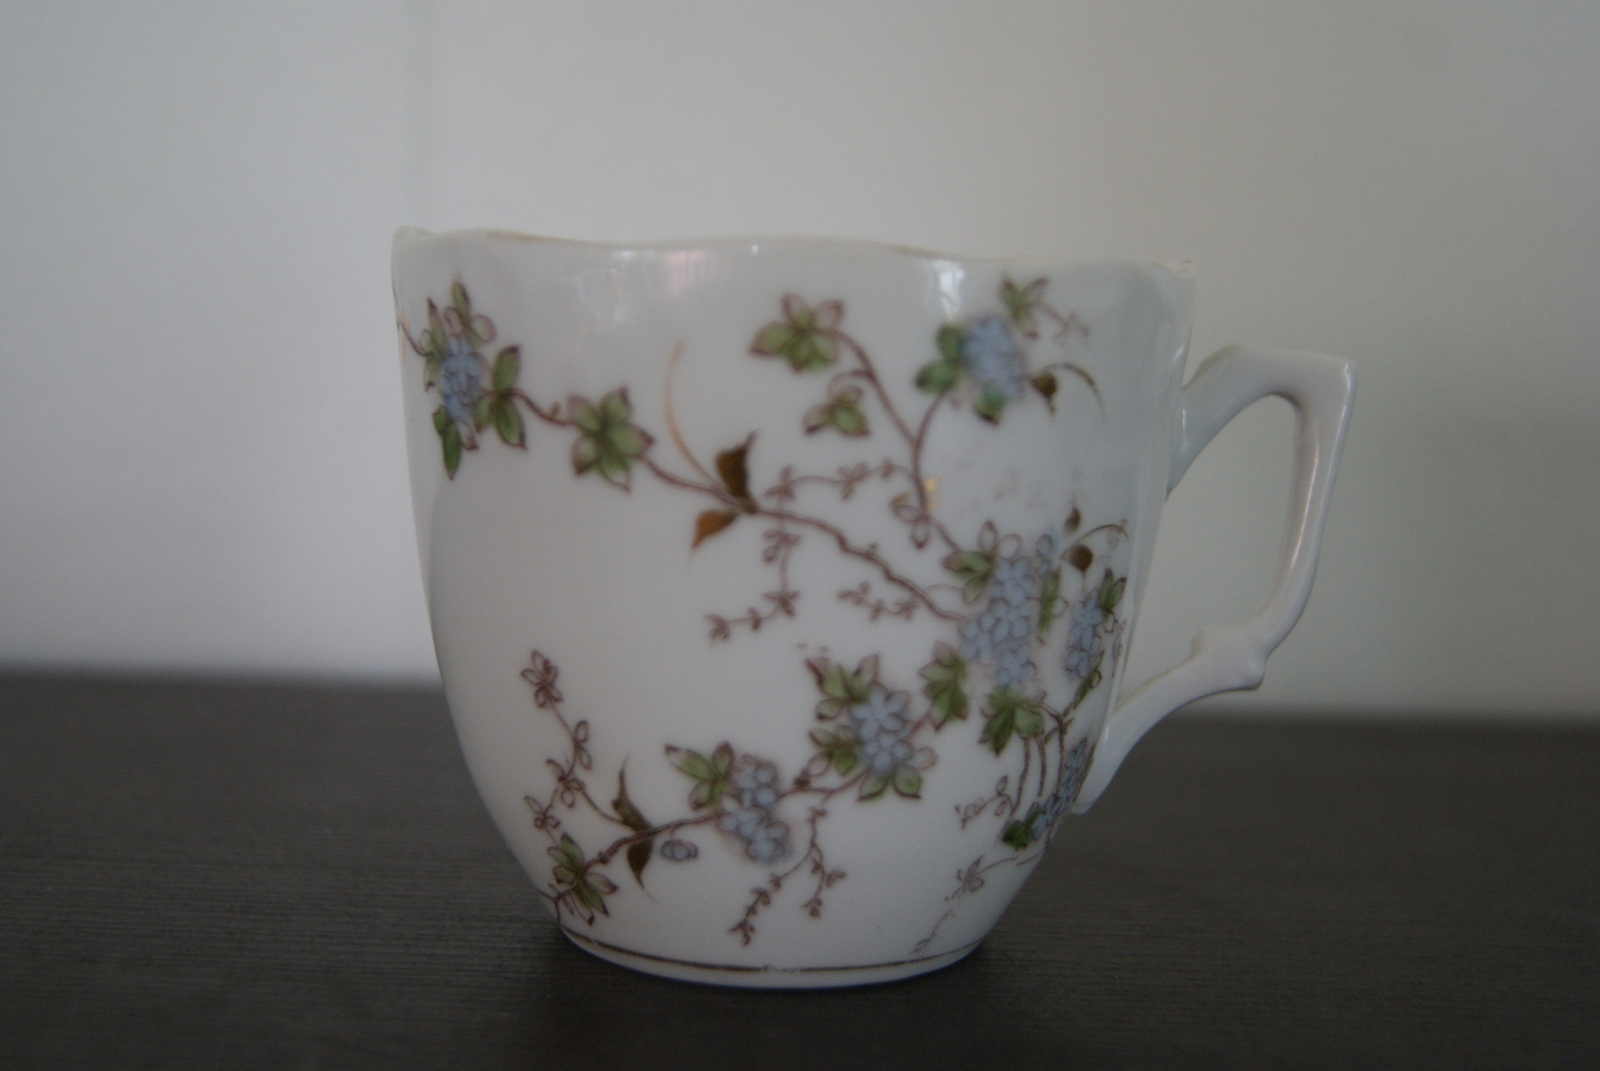 Porsgrund coffee cup with flowers and leaves